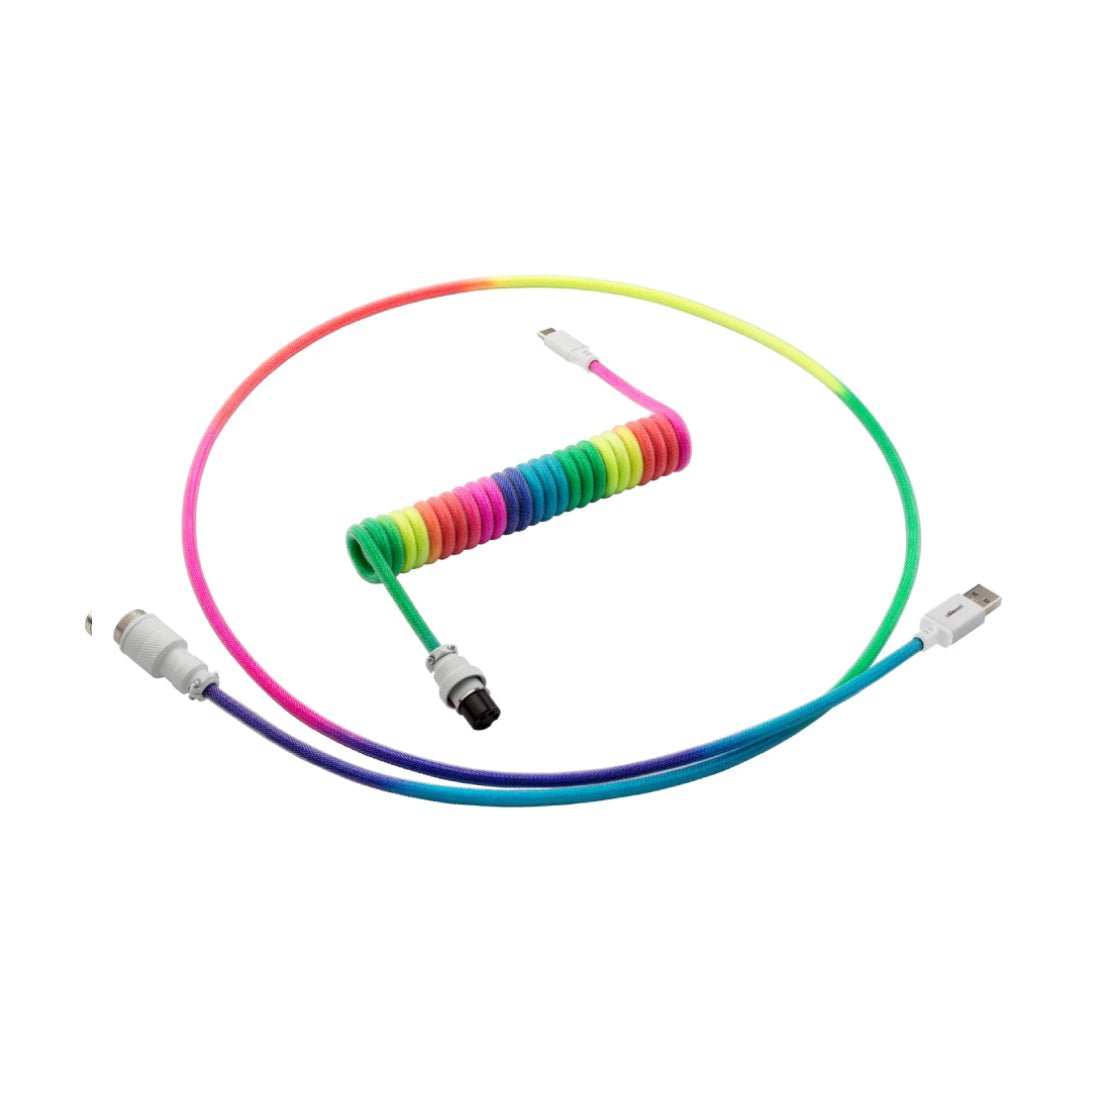 CableMod Pro Coiled Keyboard Cable (Bright Rainbow, USB A to USB Type C, 150cm) - كابل - Store 974 | ستور ٩٧٤